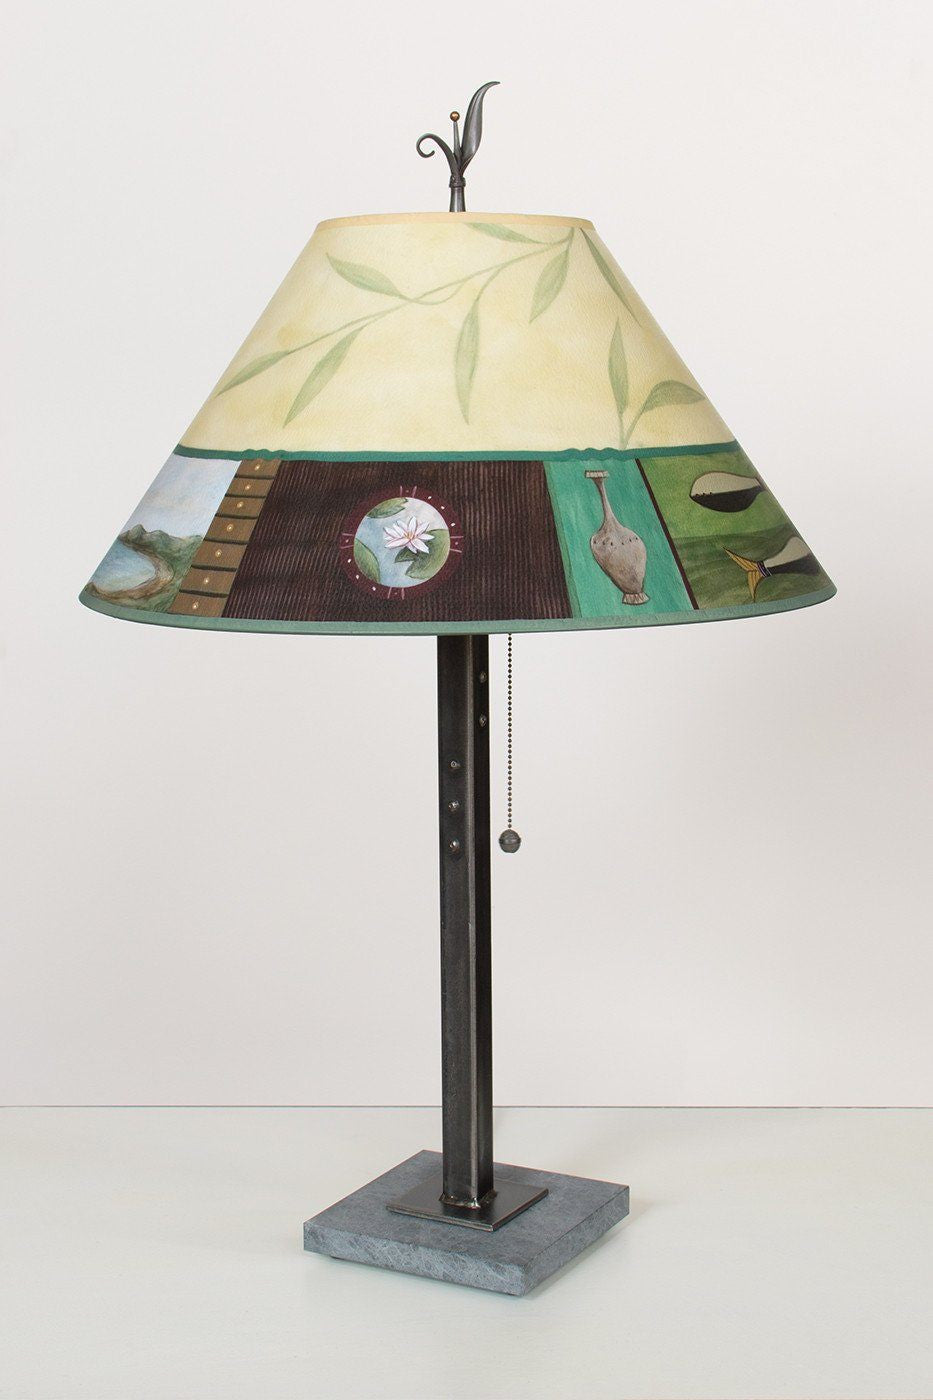 Steel Table Lamp on Italian Marble with Large Conical Shade in Twin Fish